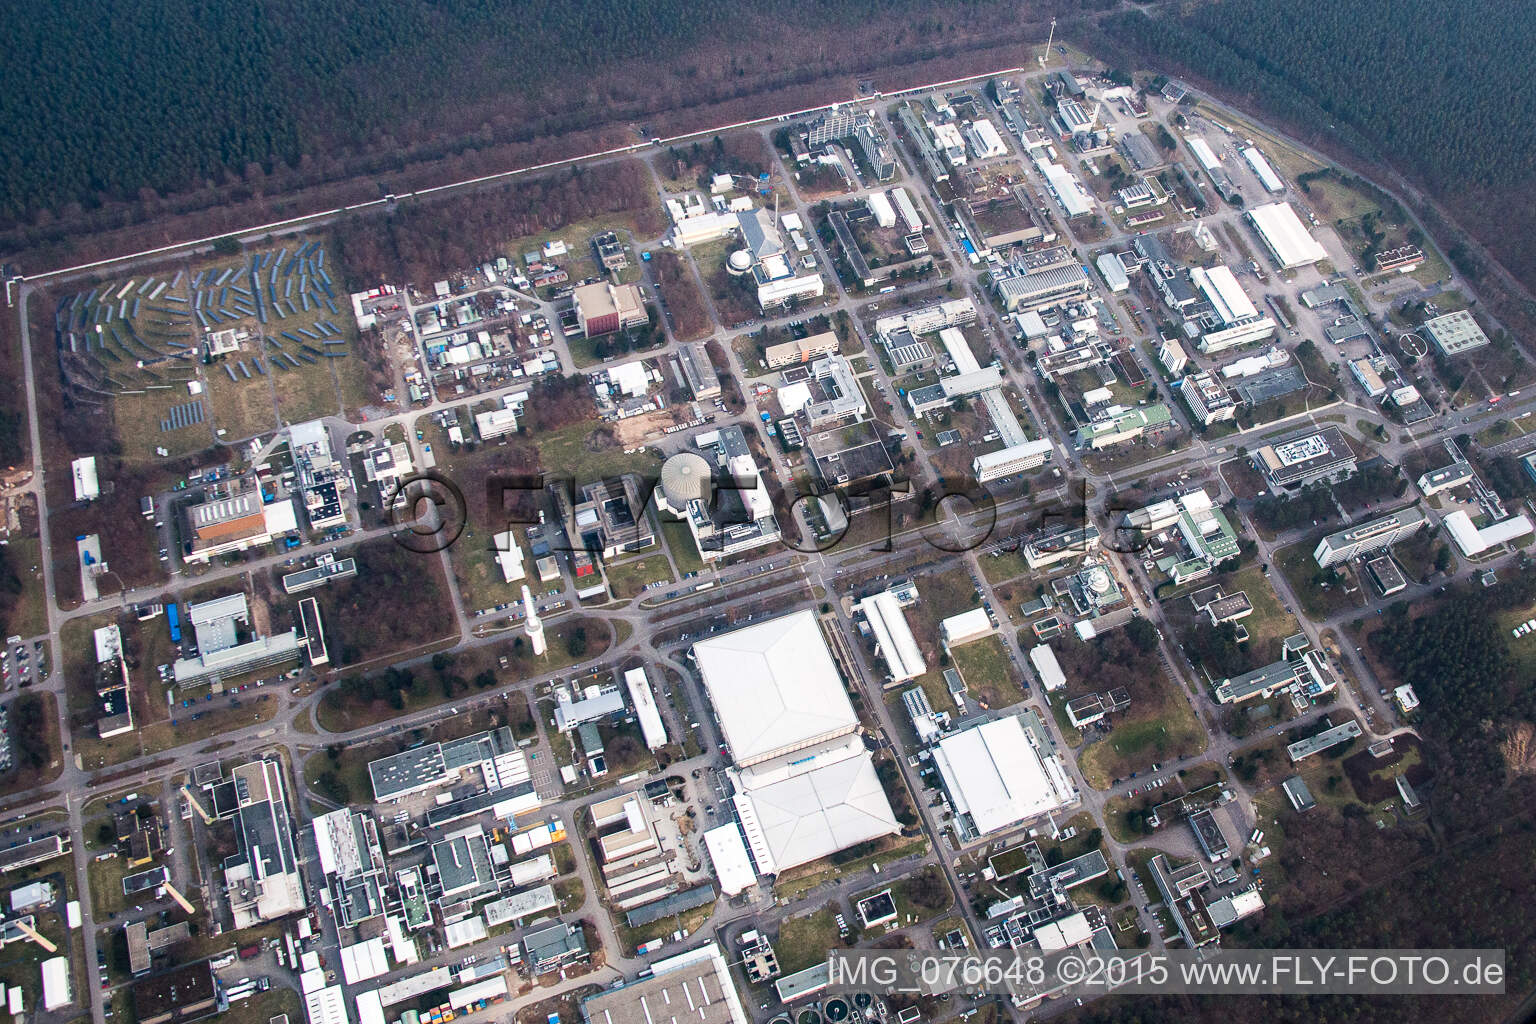 KIK Campus North in the district Leopoldshafen in Eggenstein-Leopoldshafen in the state Baden-Wuerttemberg, Germany from above